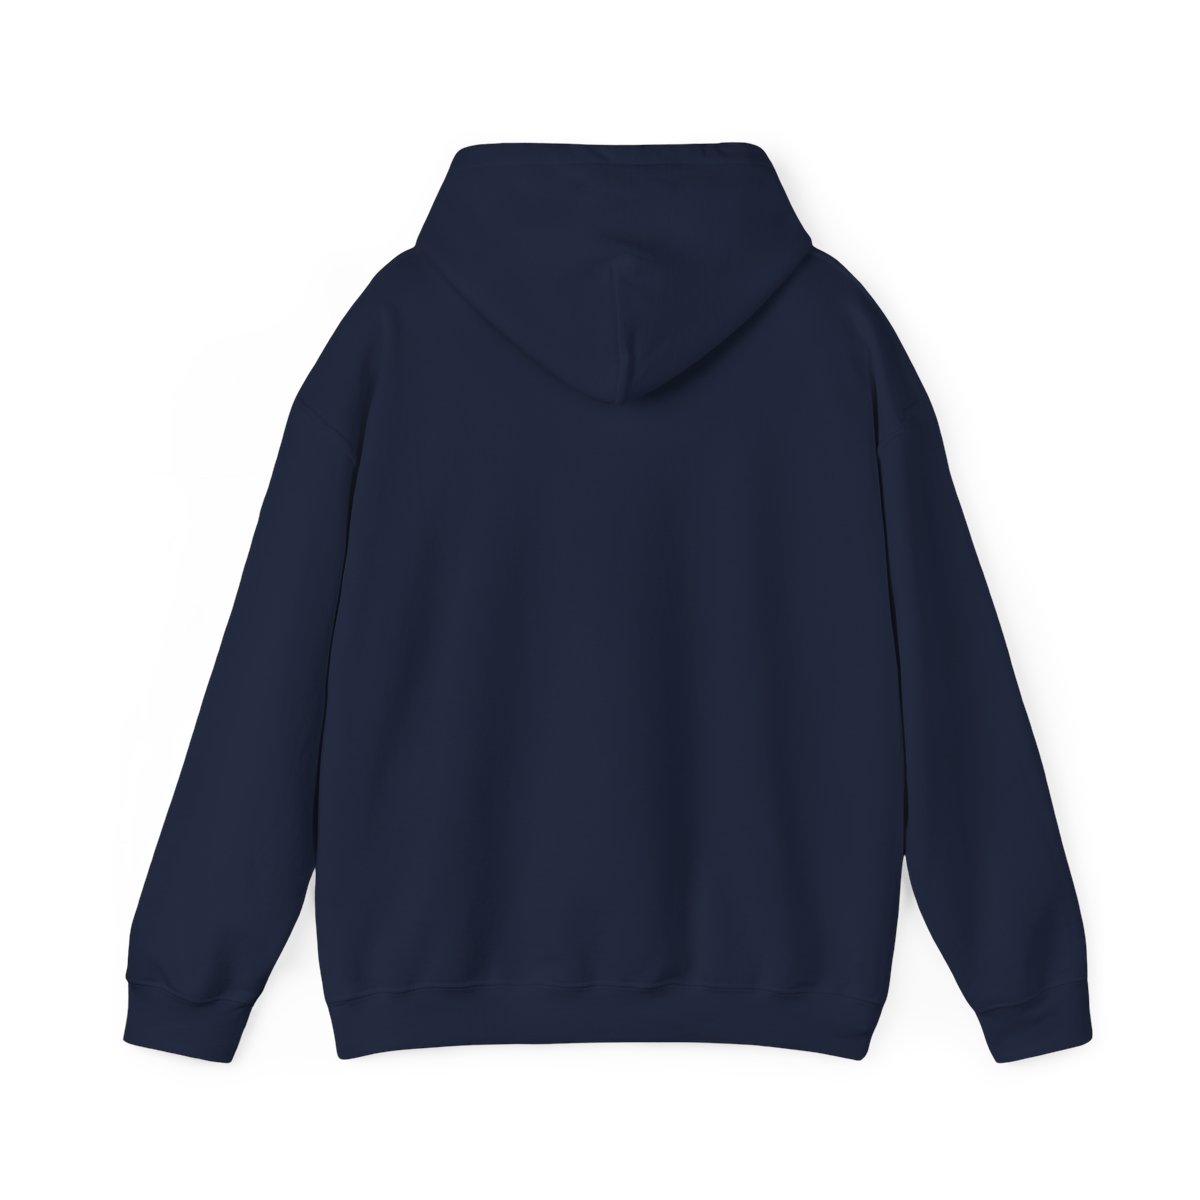 W Hoodie product thumbnail image